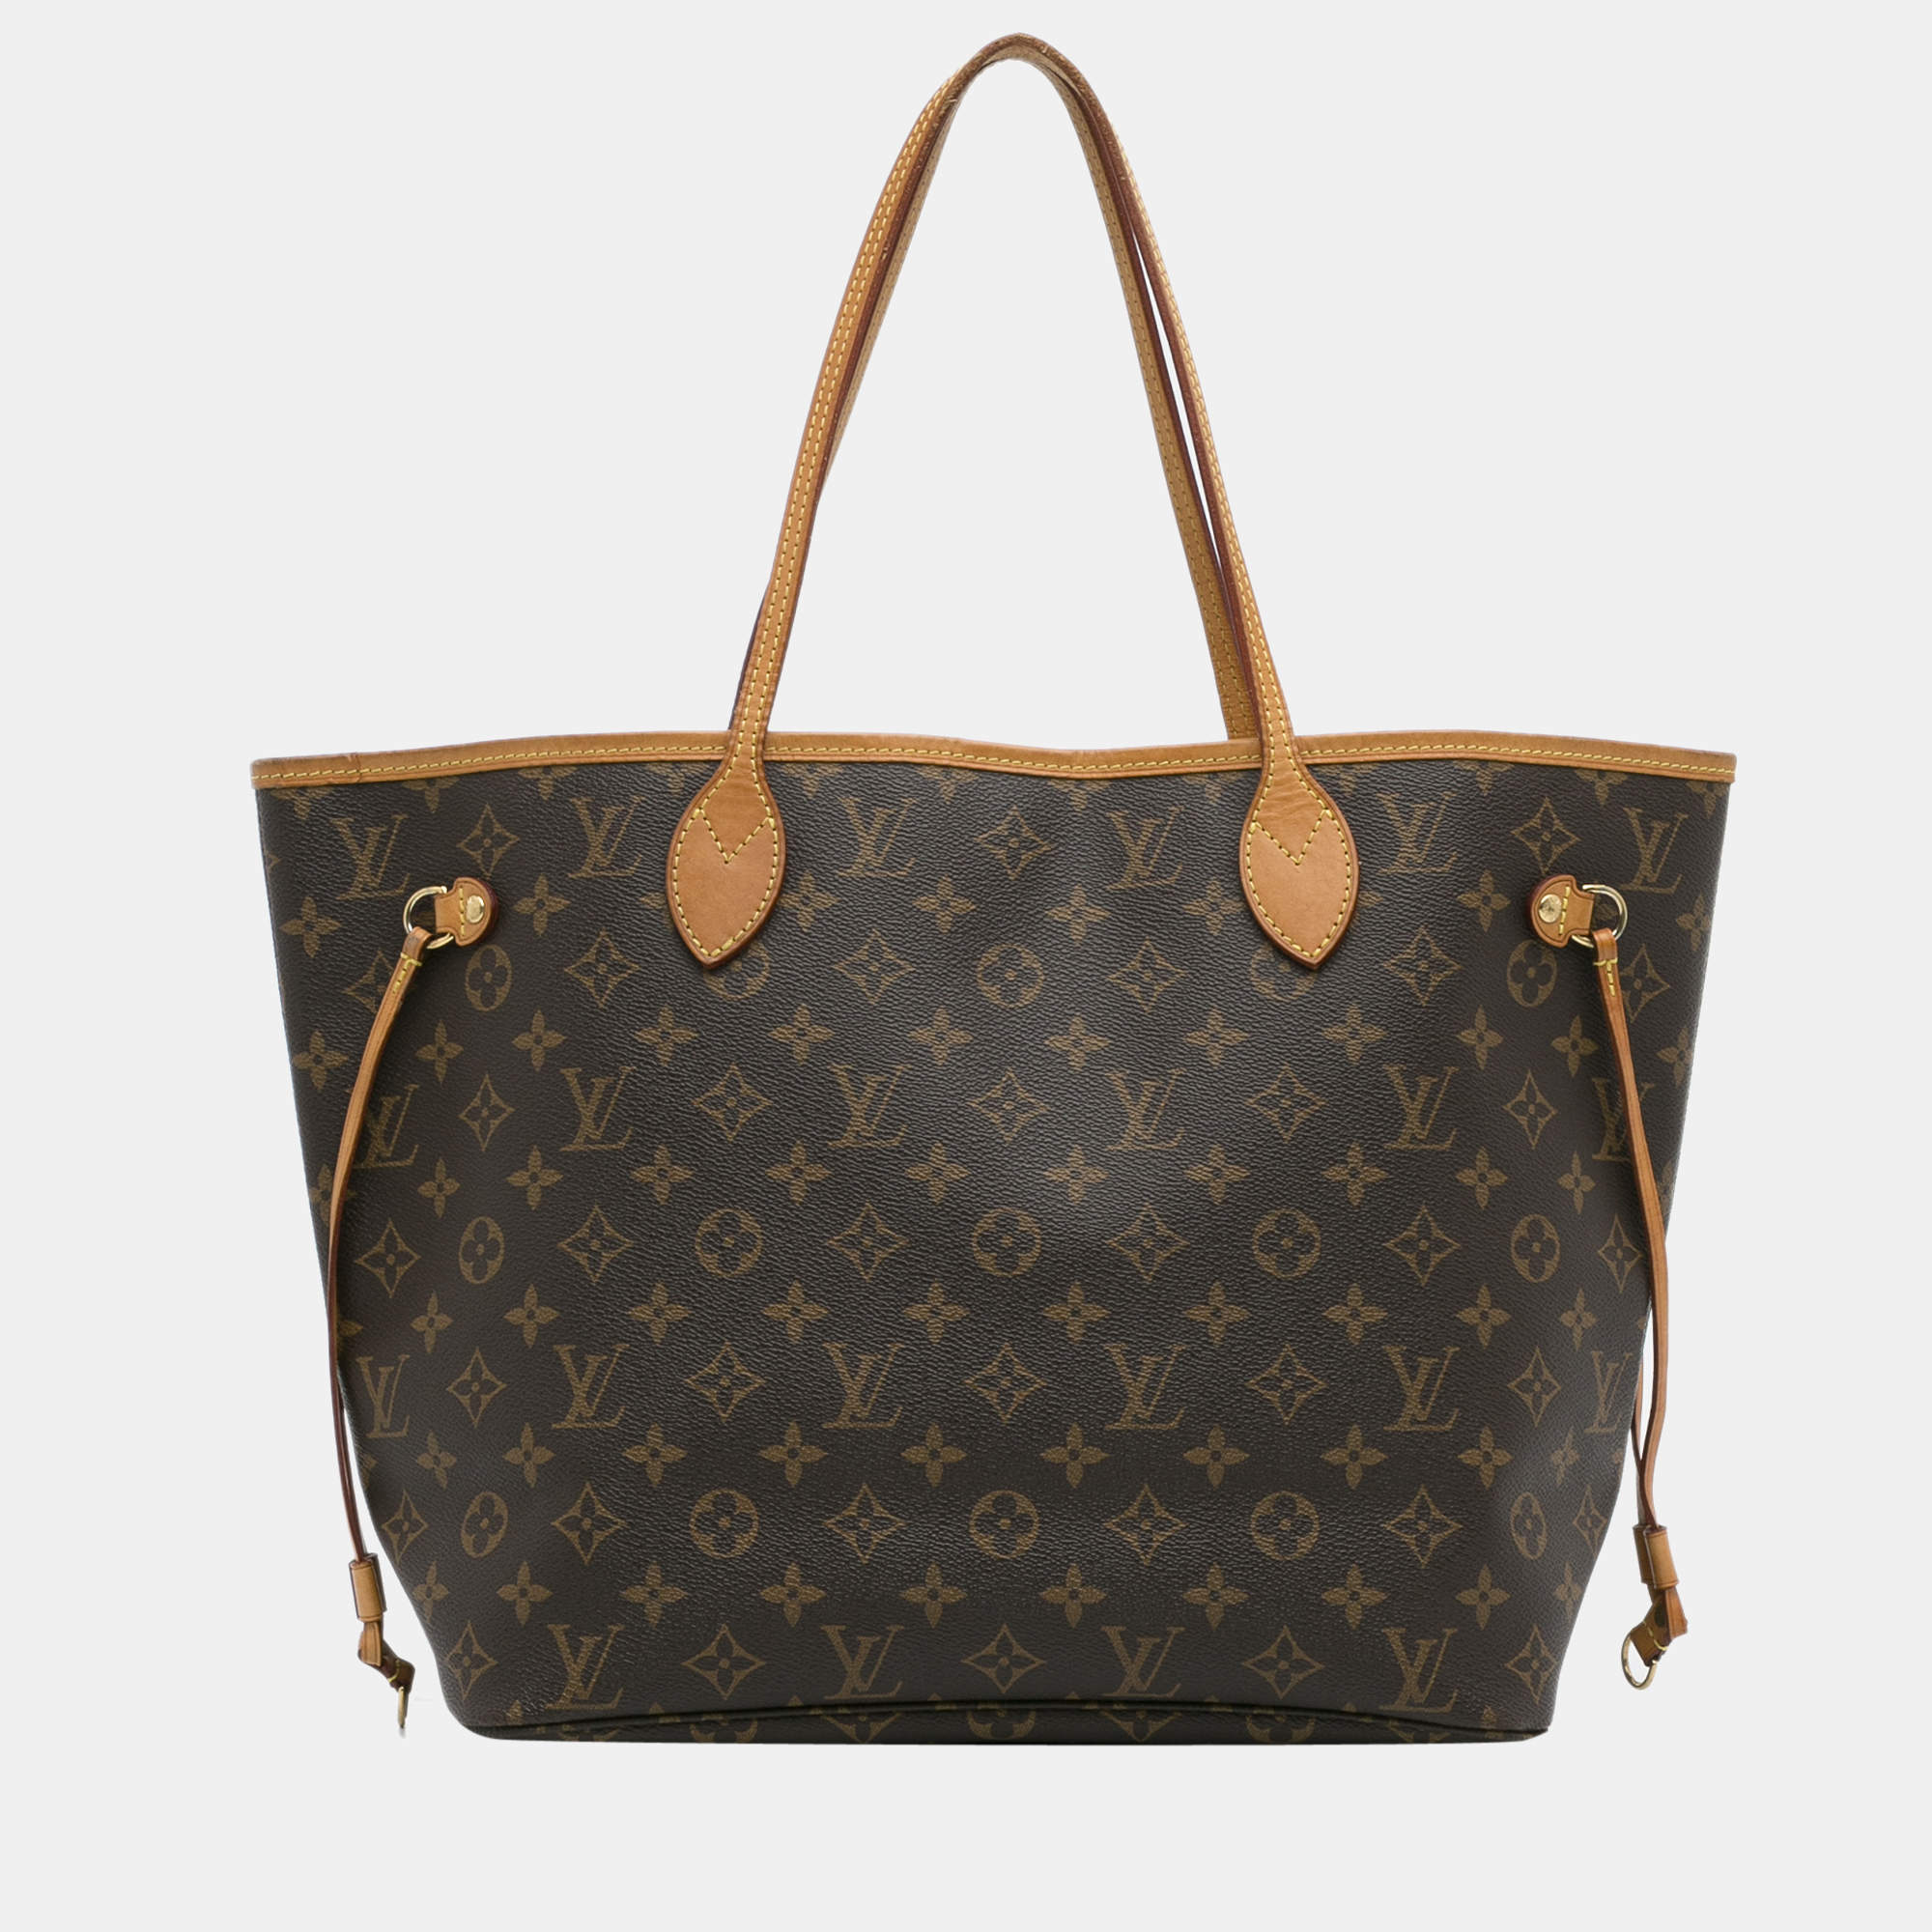 Thoughts on Carryall mm? : r/Louisvuitton